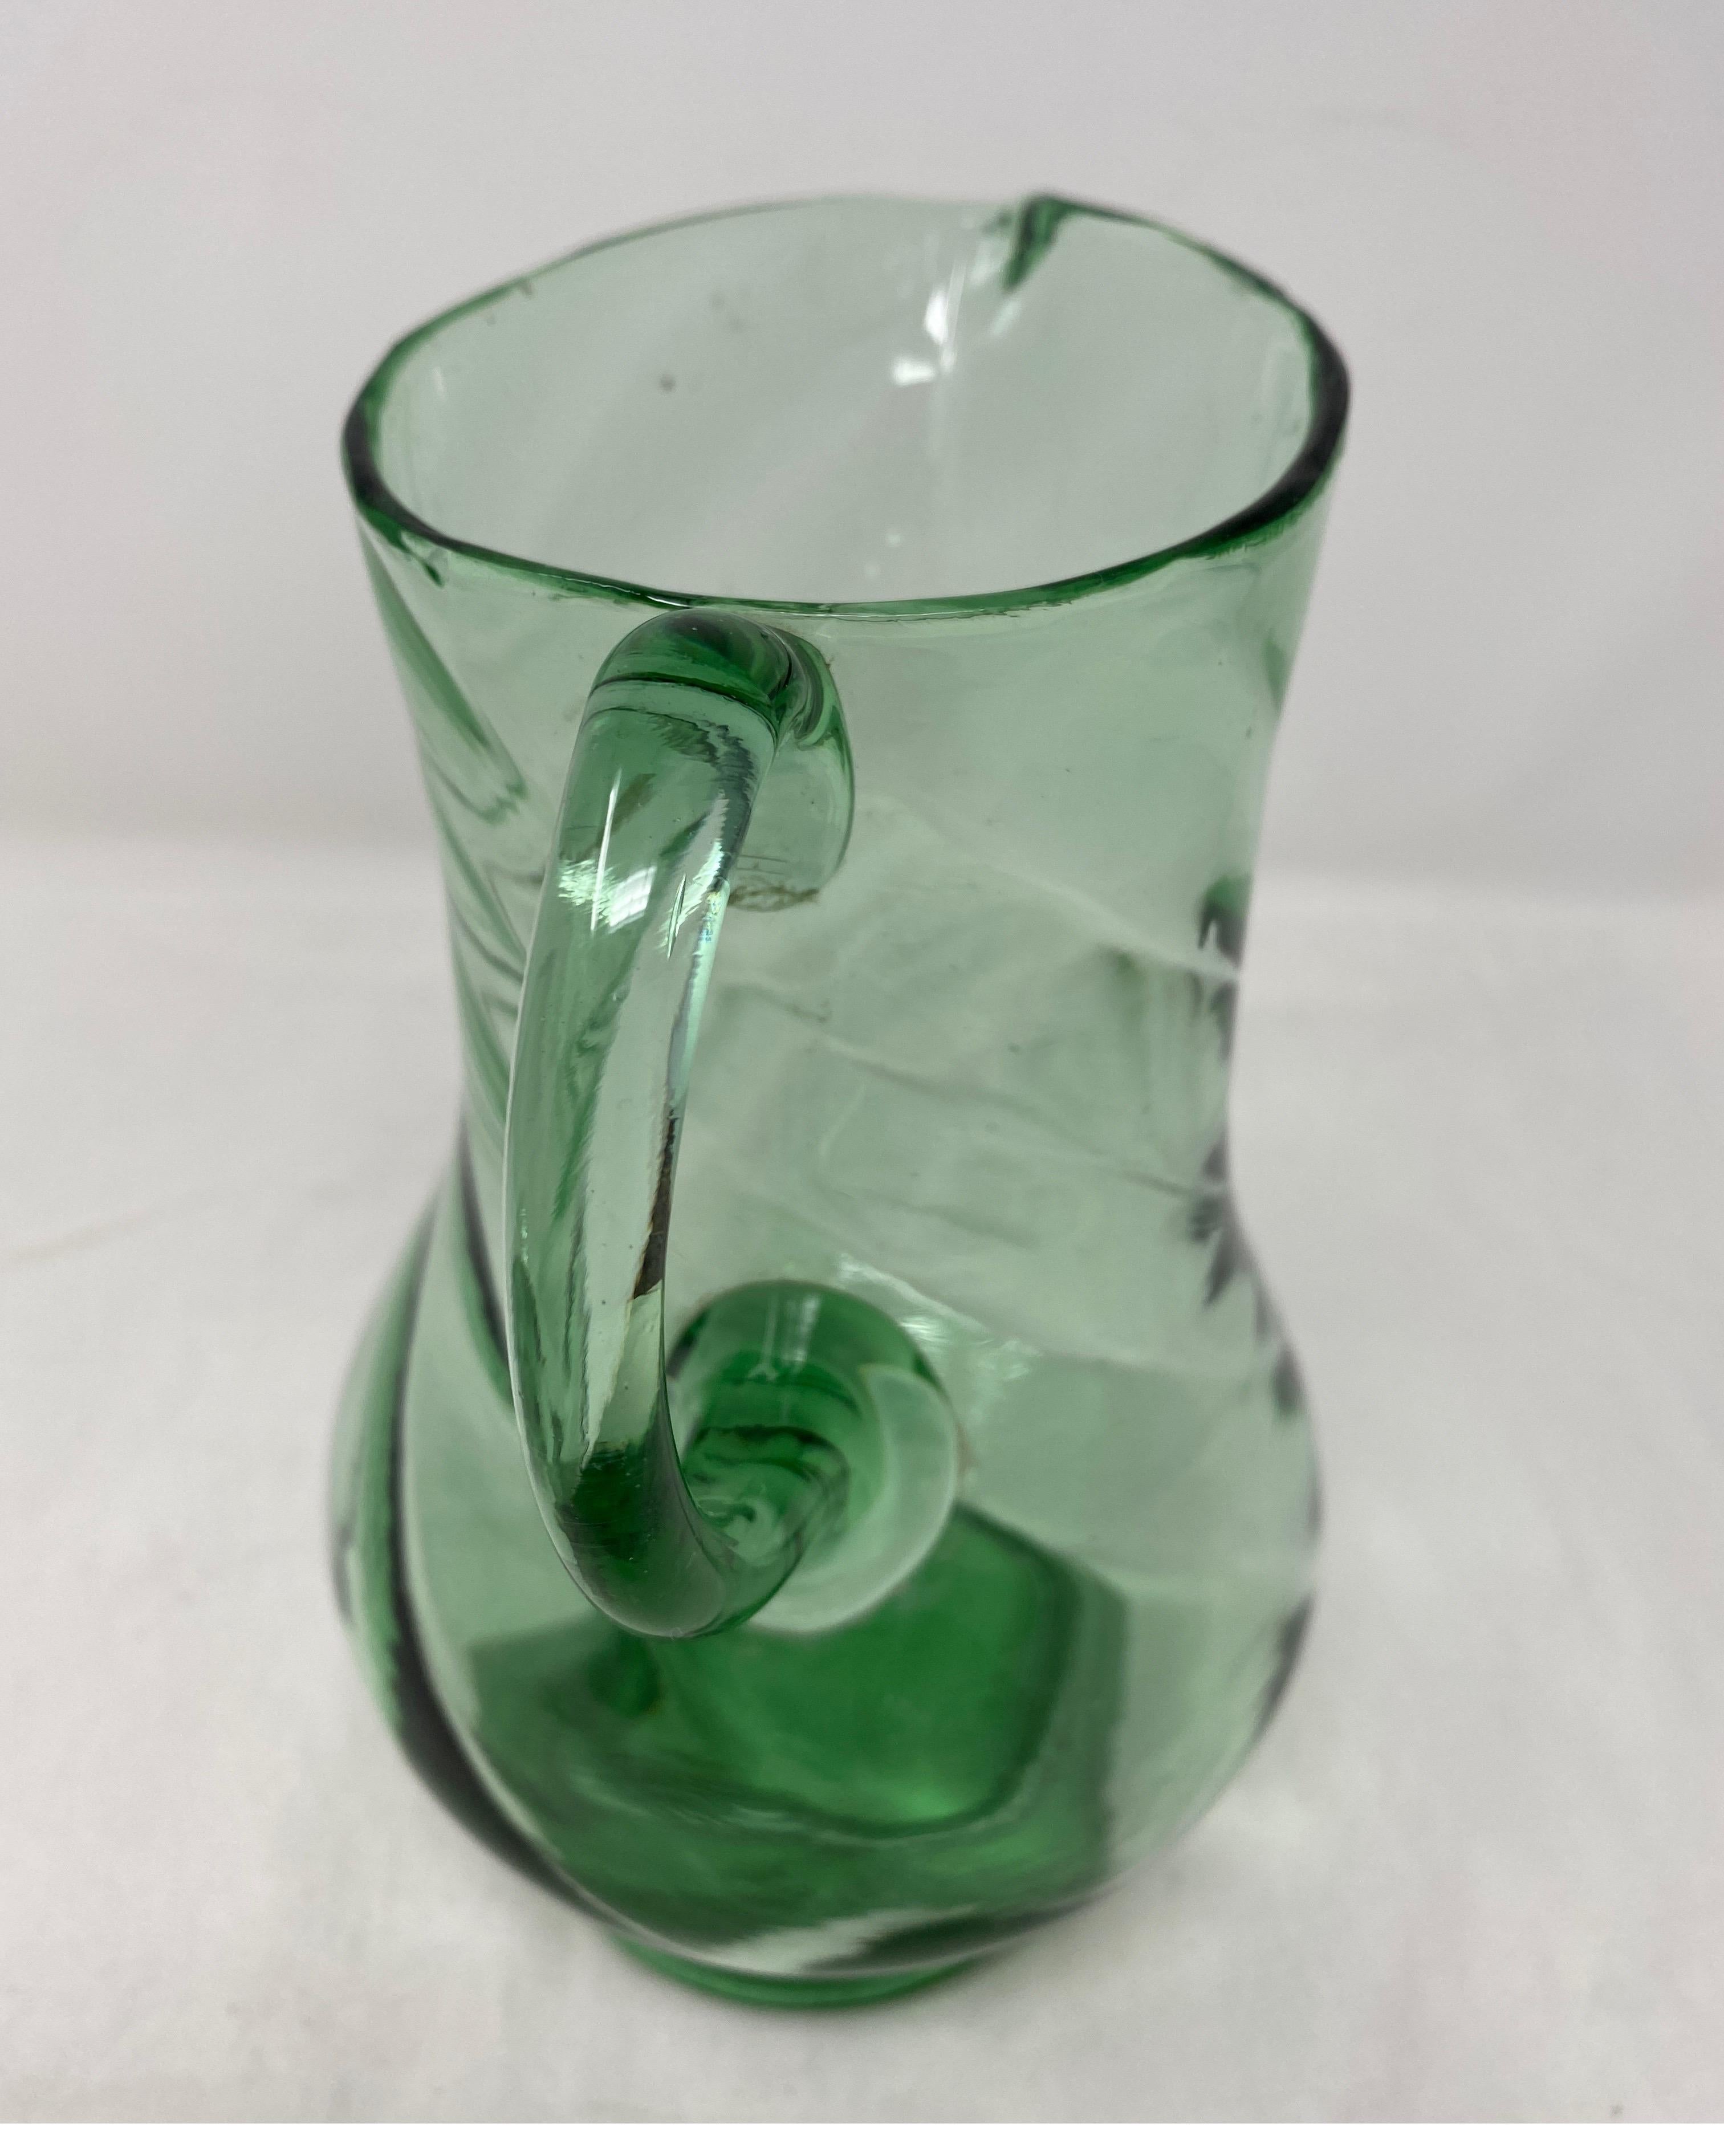 Green crystal pitcher. Beautiful dainty pitcher with a swirl pattern. 19th century.
5